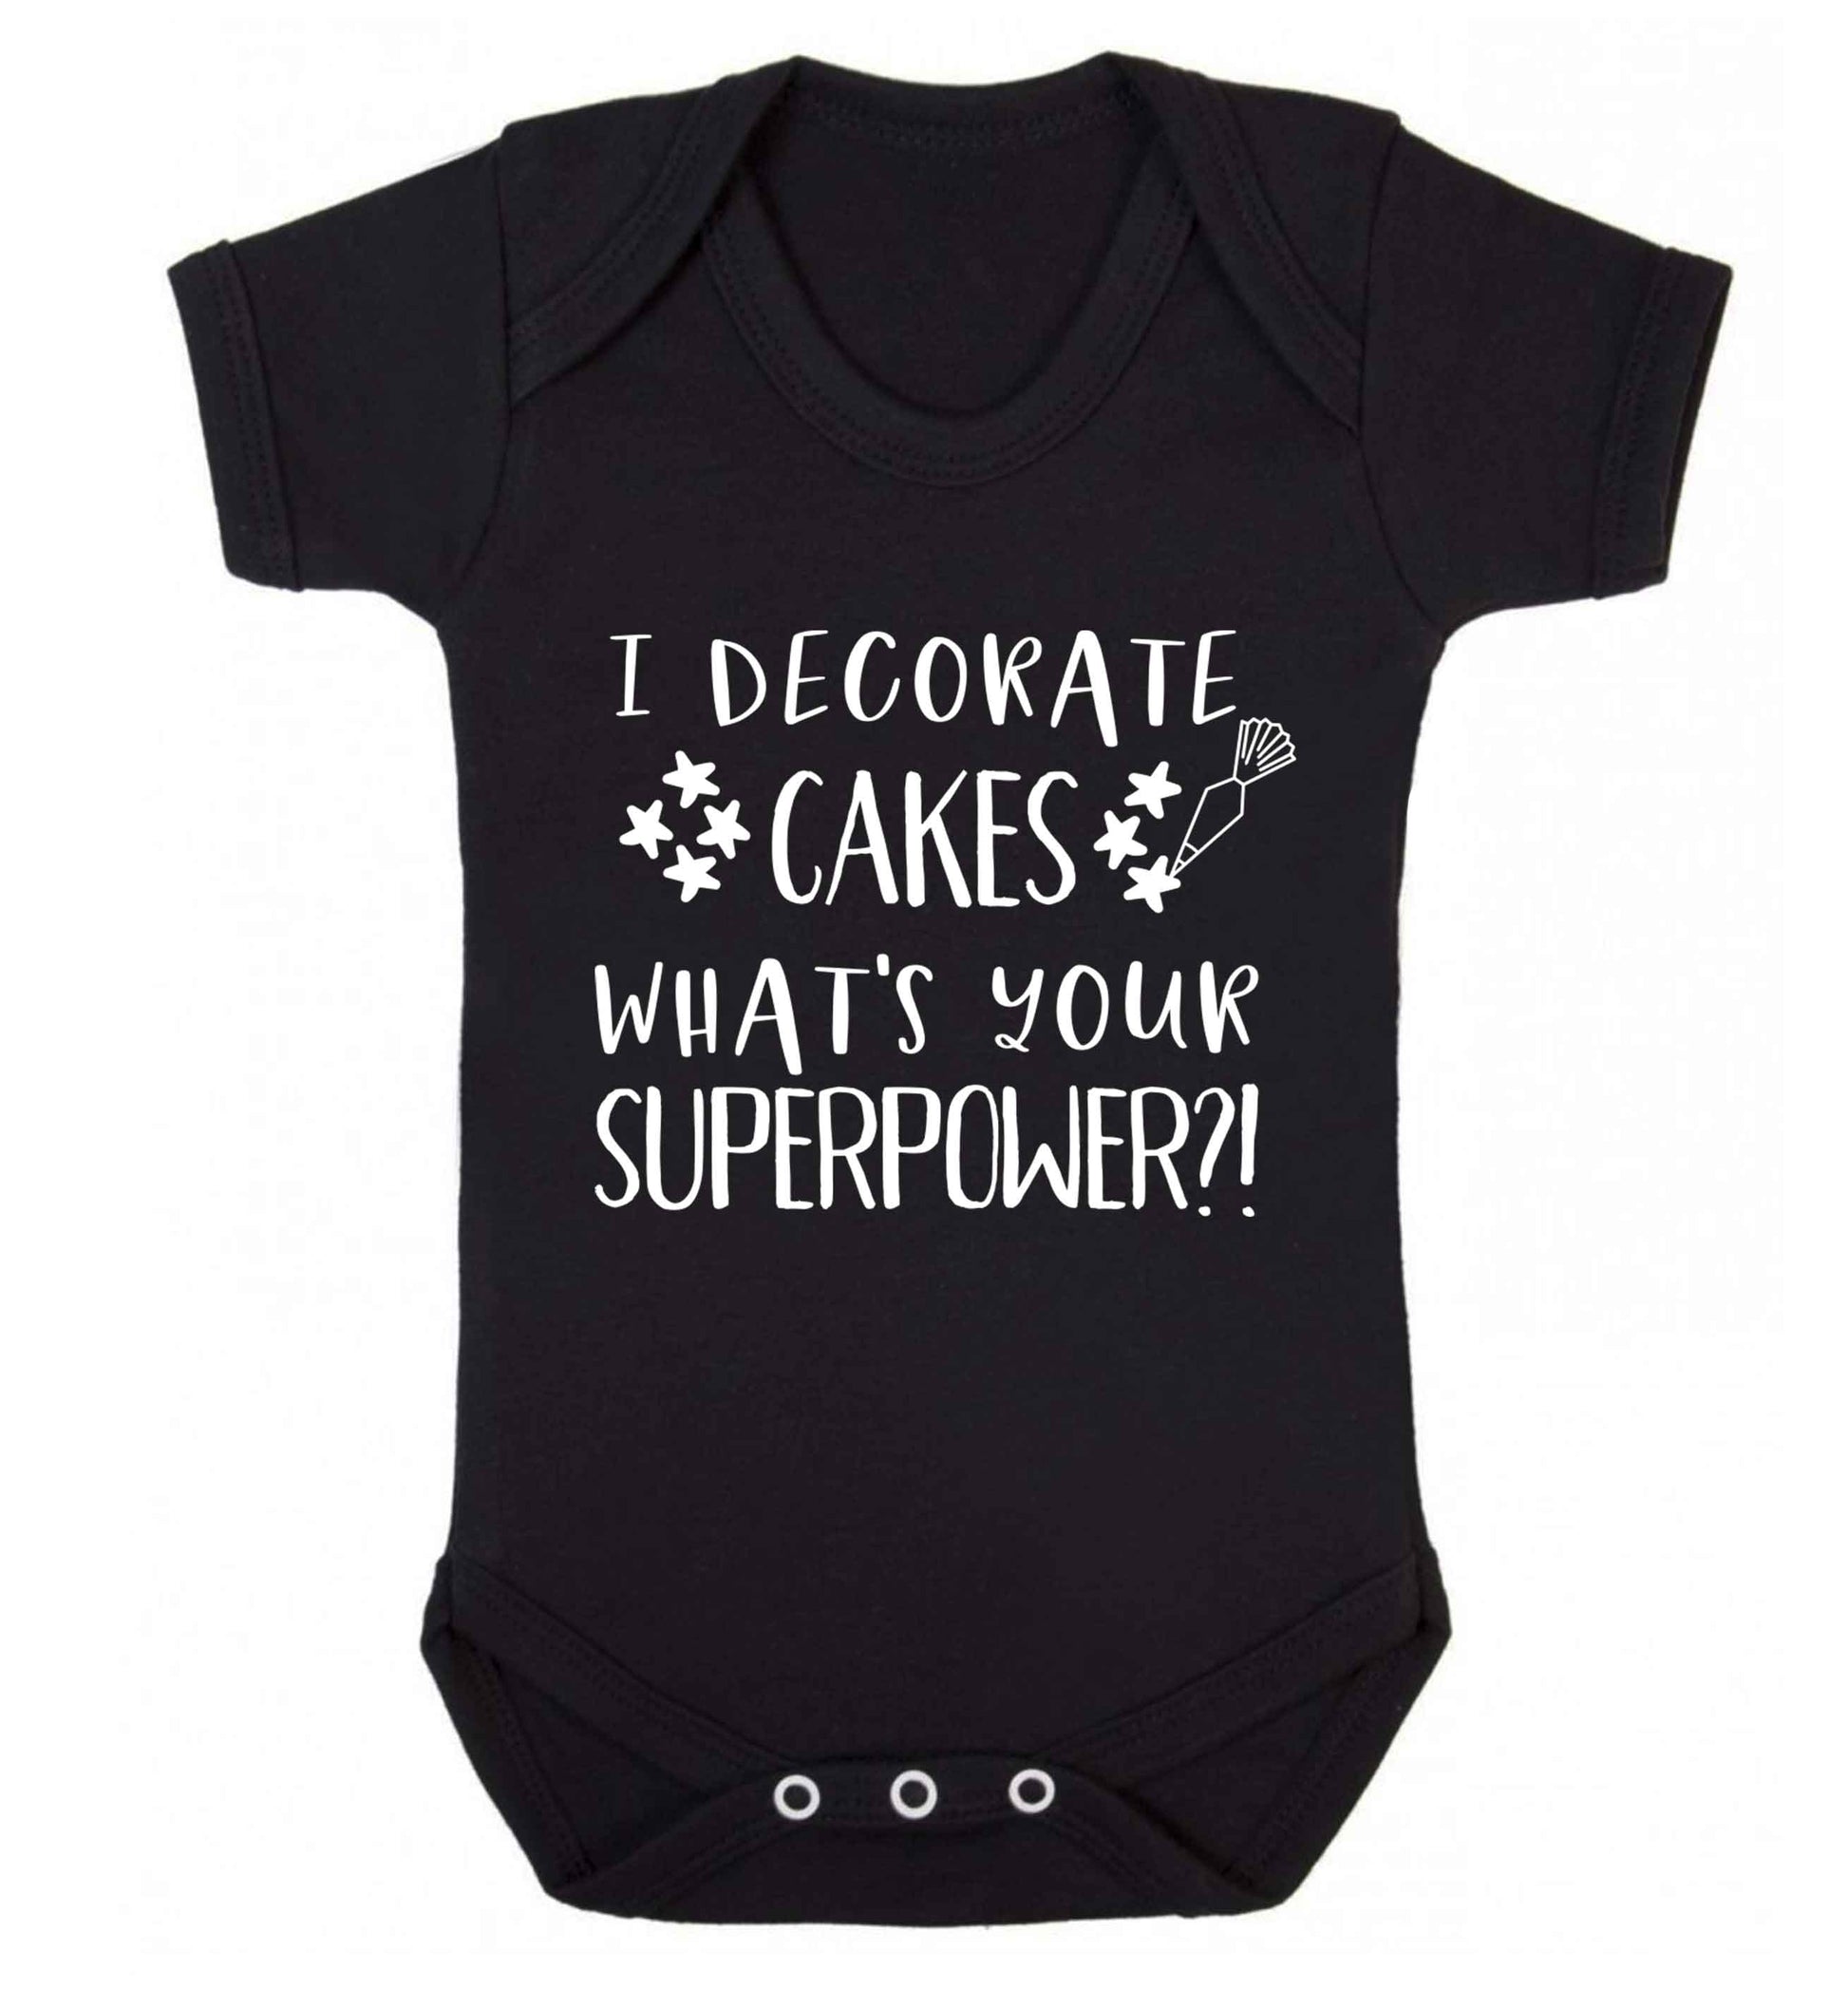 I decorate cakes what's your superpower?! Baby Vest black 18-24 months